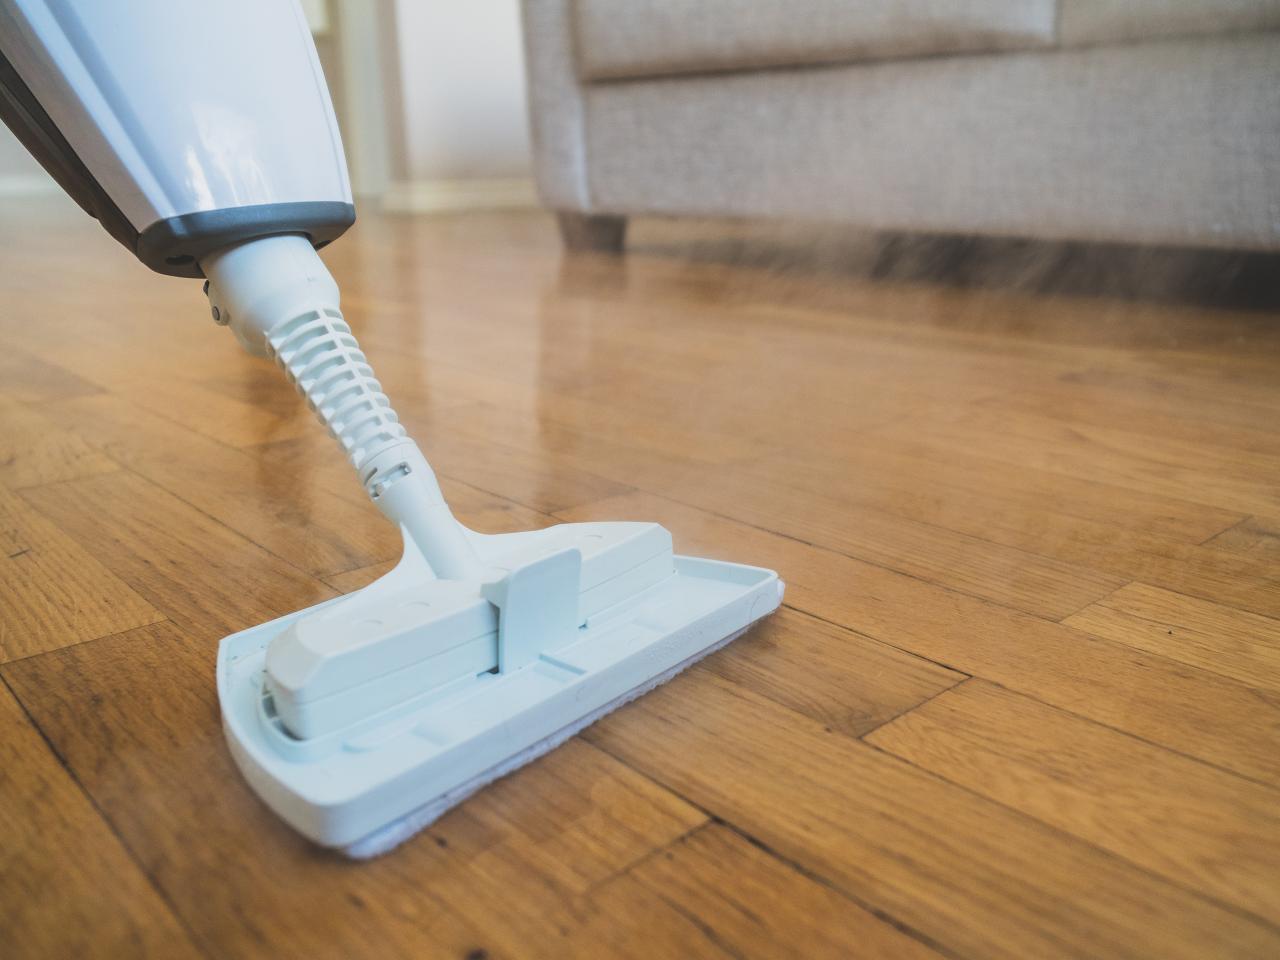 Damage Your Floor With A Steam Mop, Best Steam Mop For Laminate And Tile Floors